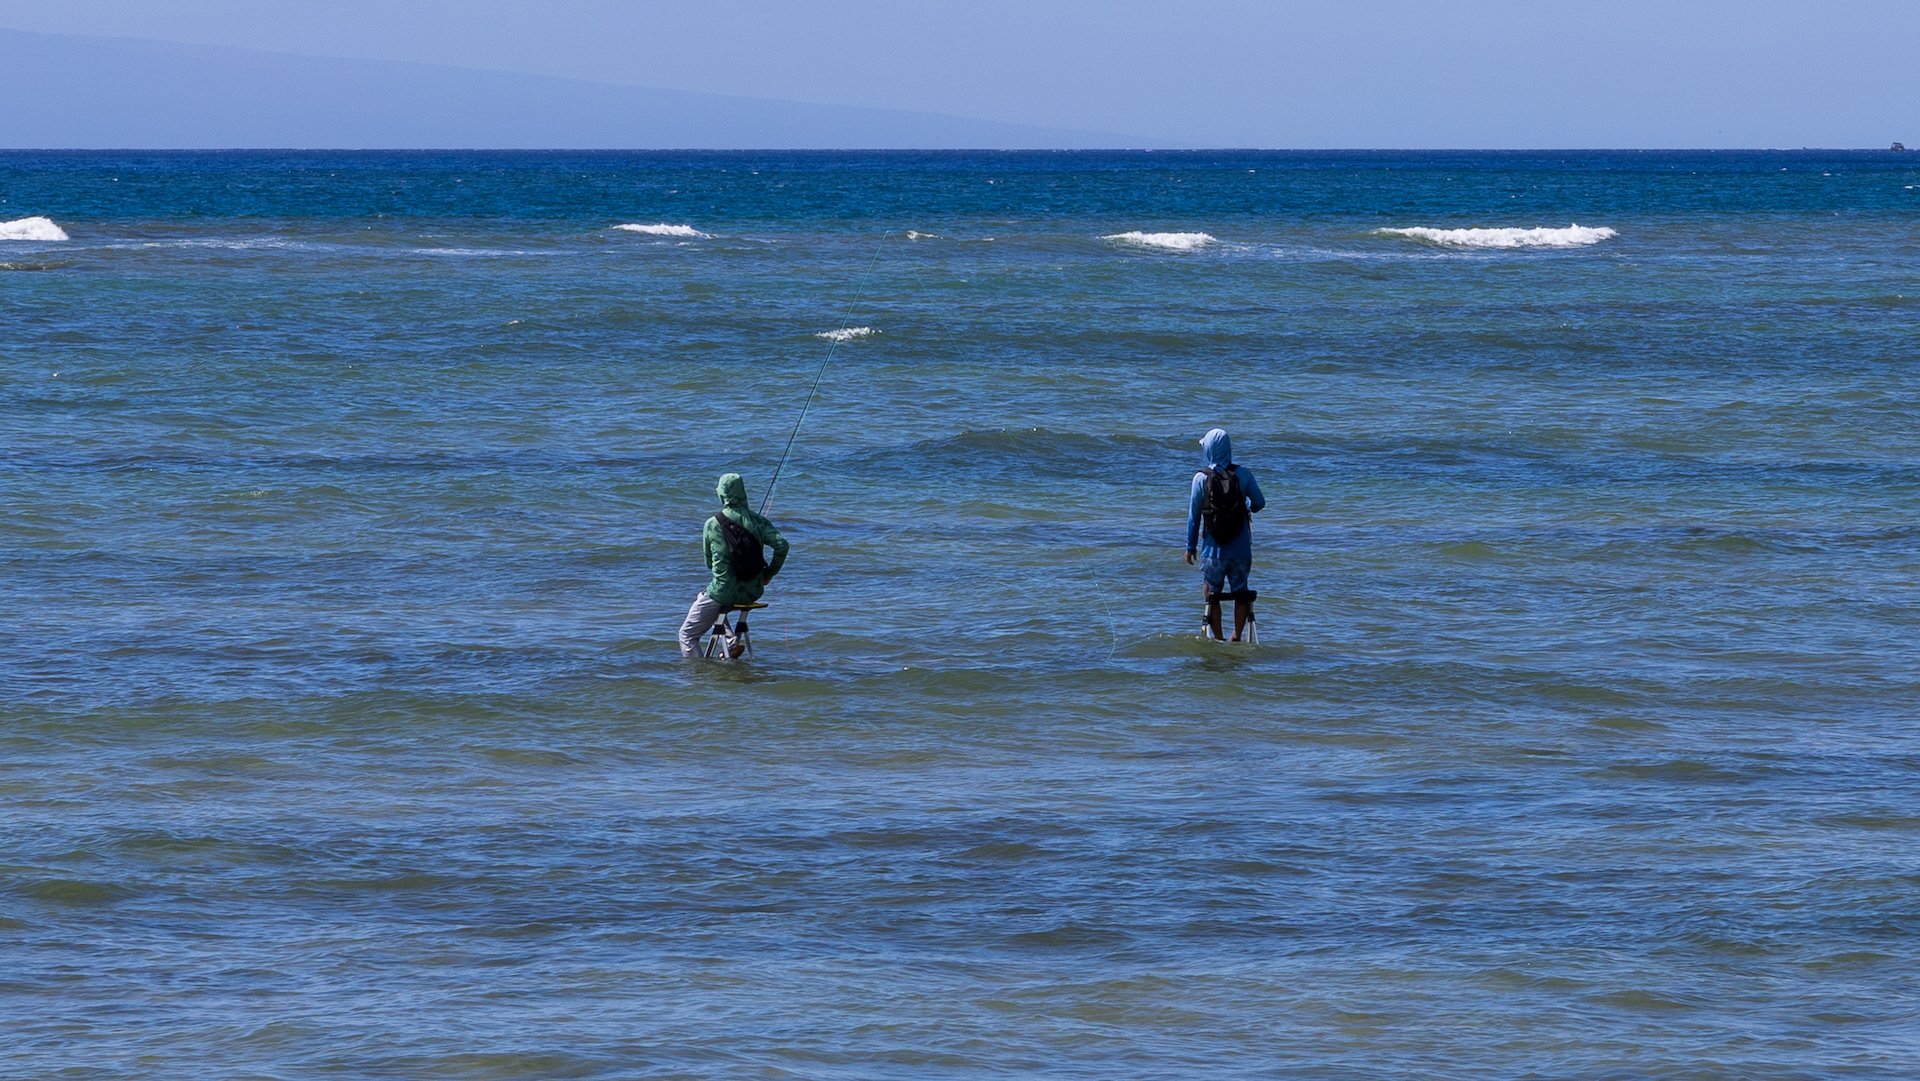  These guys were fishing from step ladders in the ocean. Pretty crazy. 